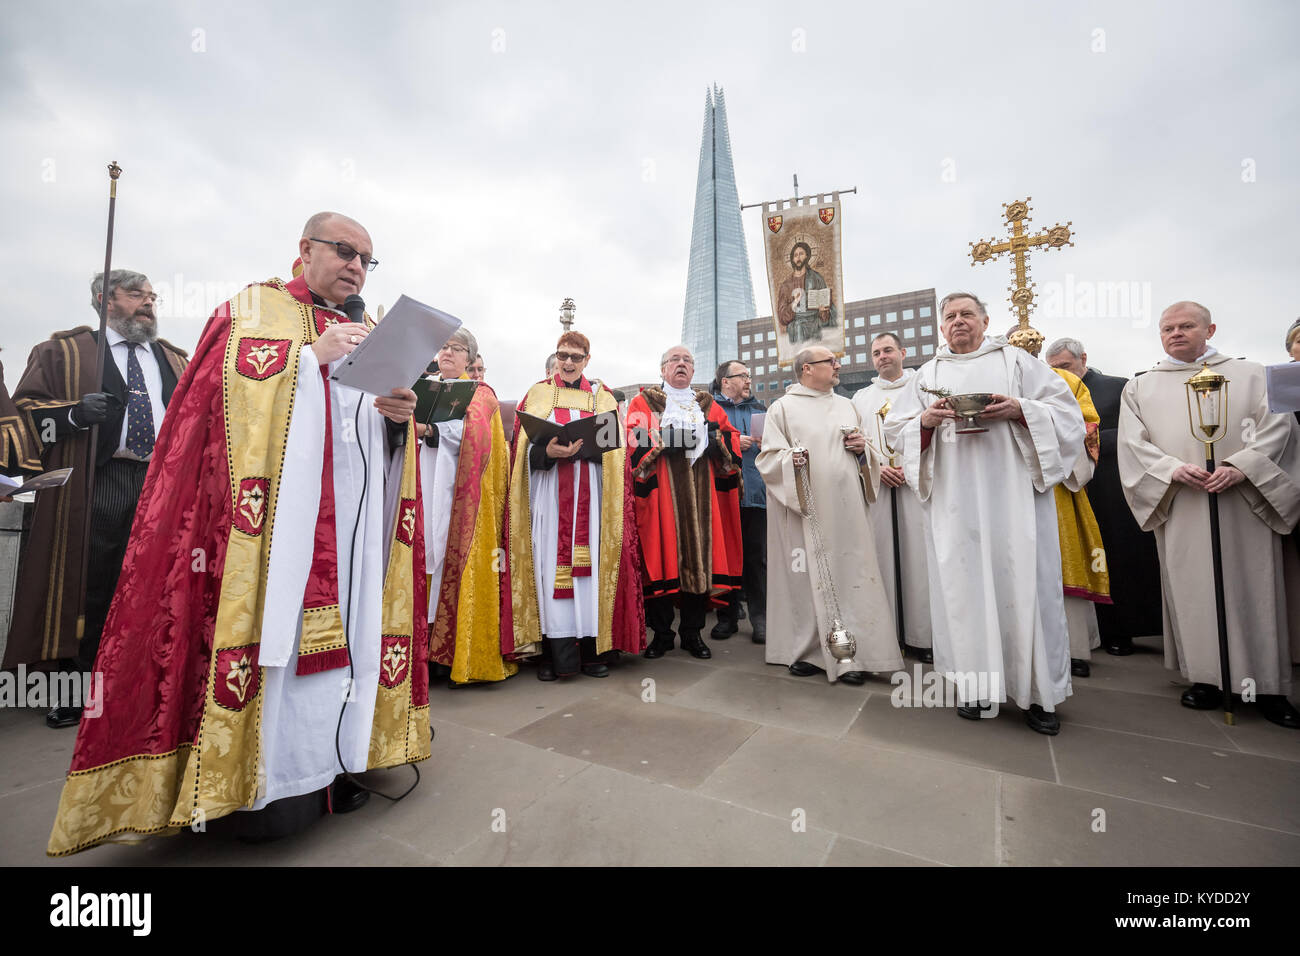 London, UK. 14th Jan, 2018. Annual blessing of the River Thames. Credit: Guy Corbishley/Alamy Live News Stock Photo